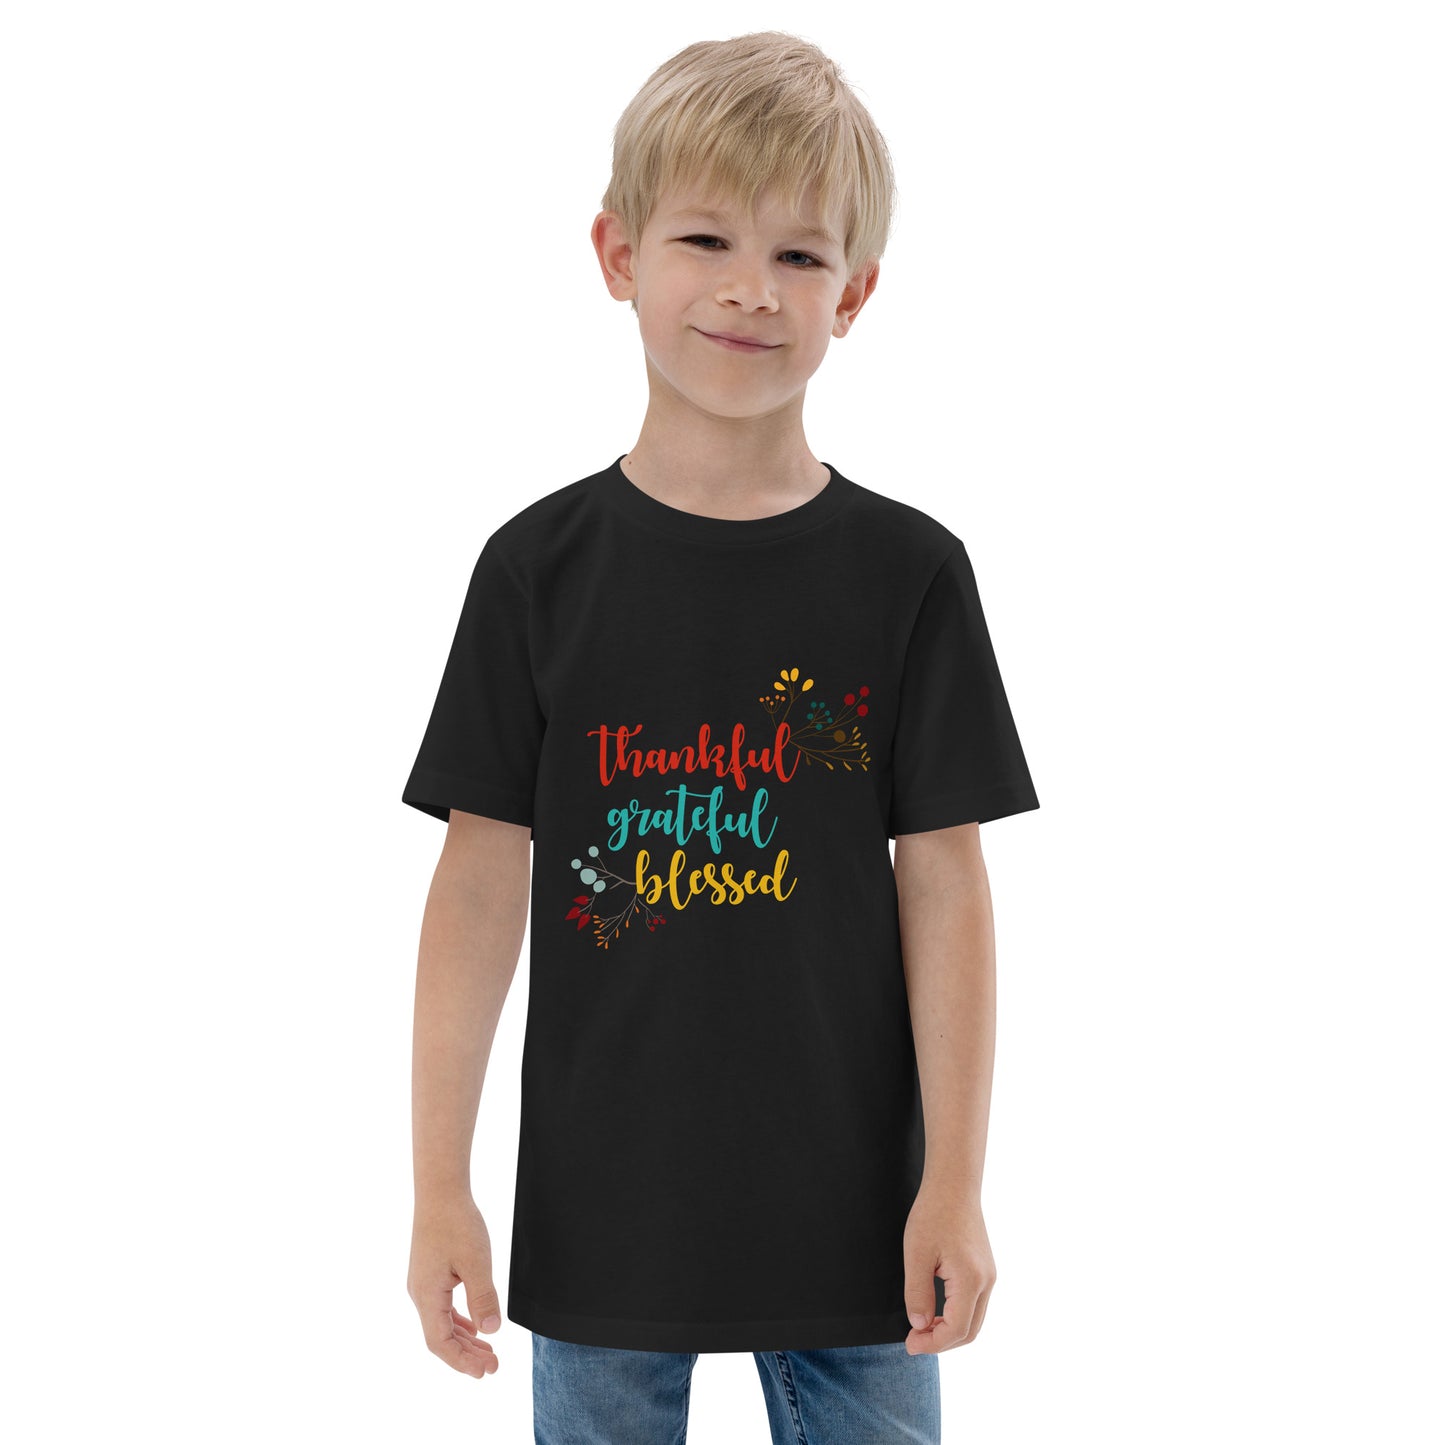 Thankful Grateful Blessed Youth jersey t-shirt